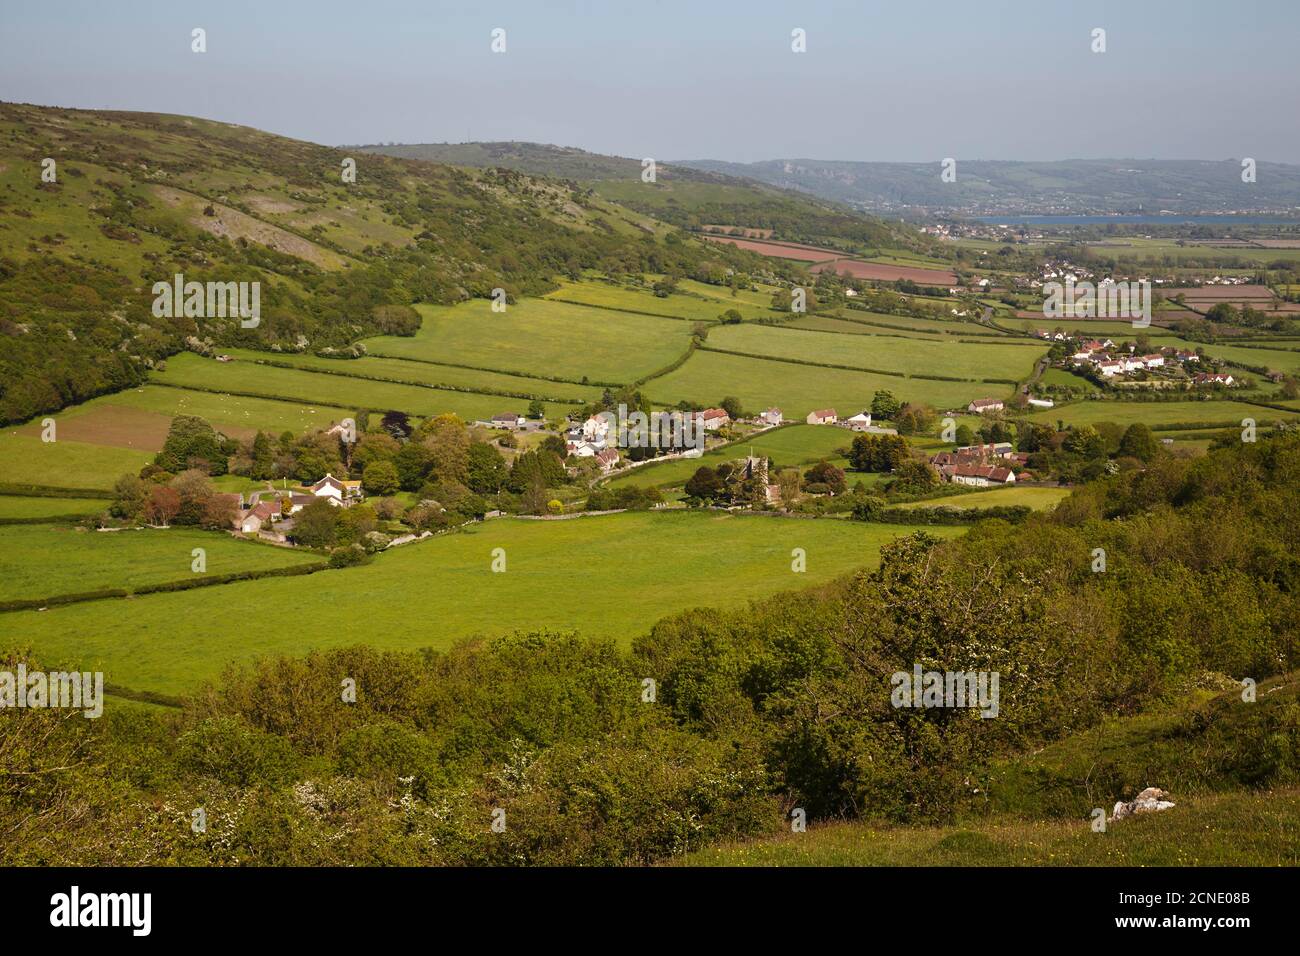 A view across countyside from Crook Peak along the southern slopes of the Mendip Hills, near Cheddar, Somerset, England, United Kingdom, Europe Stock Photo